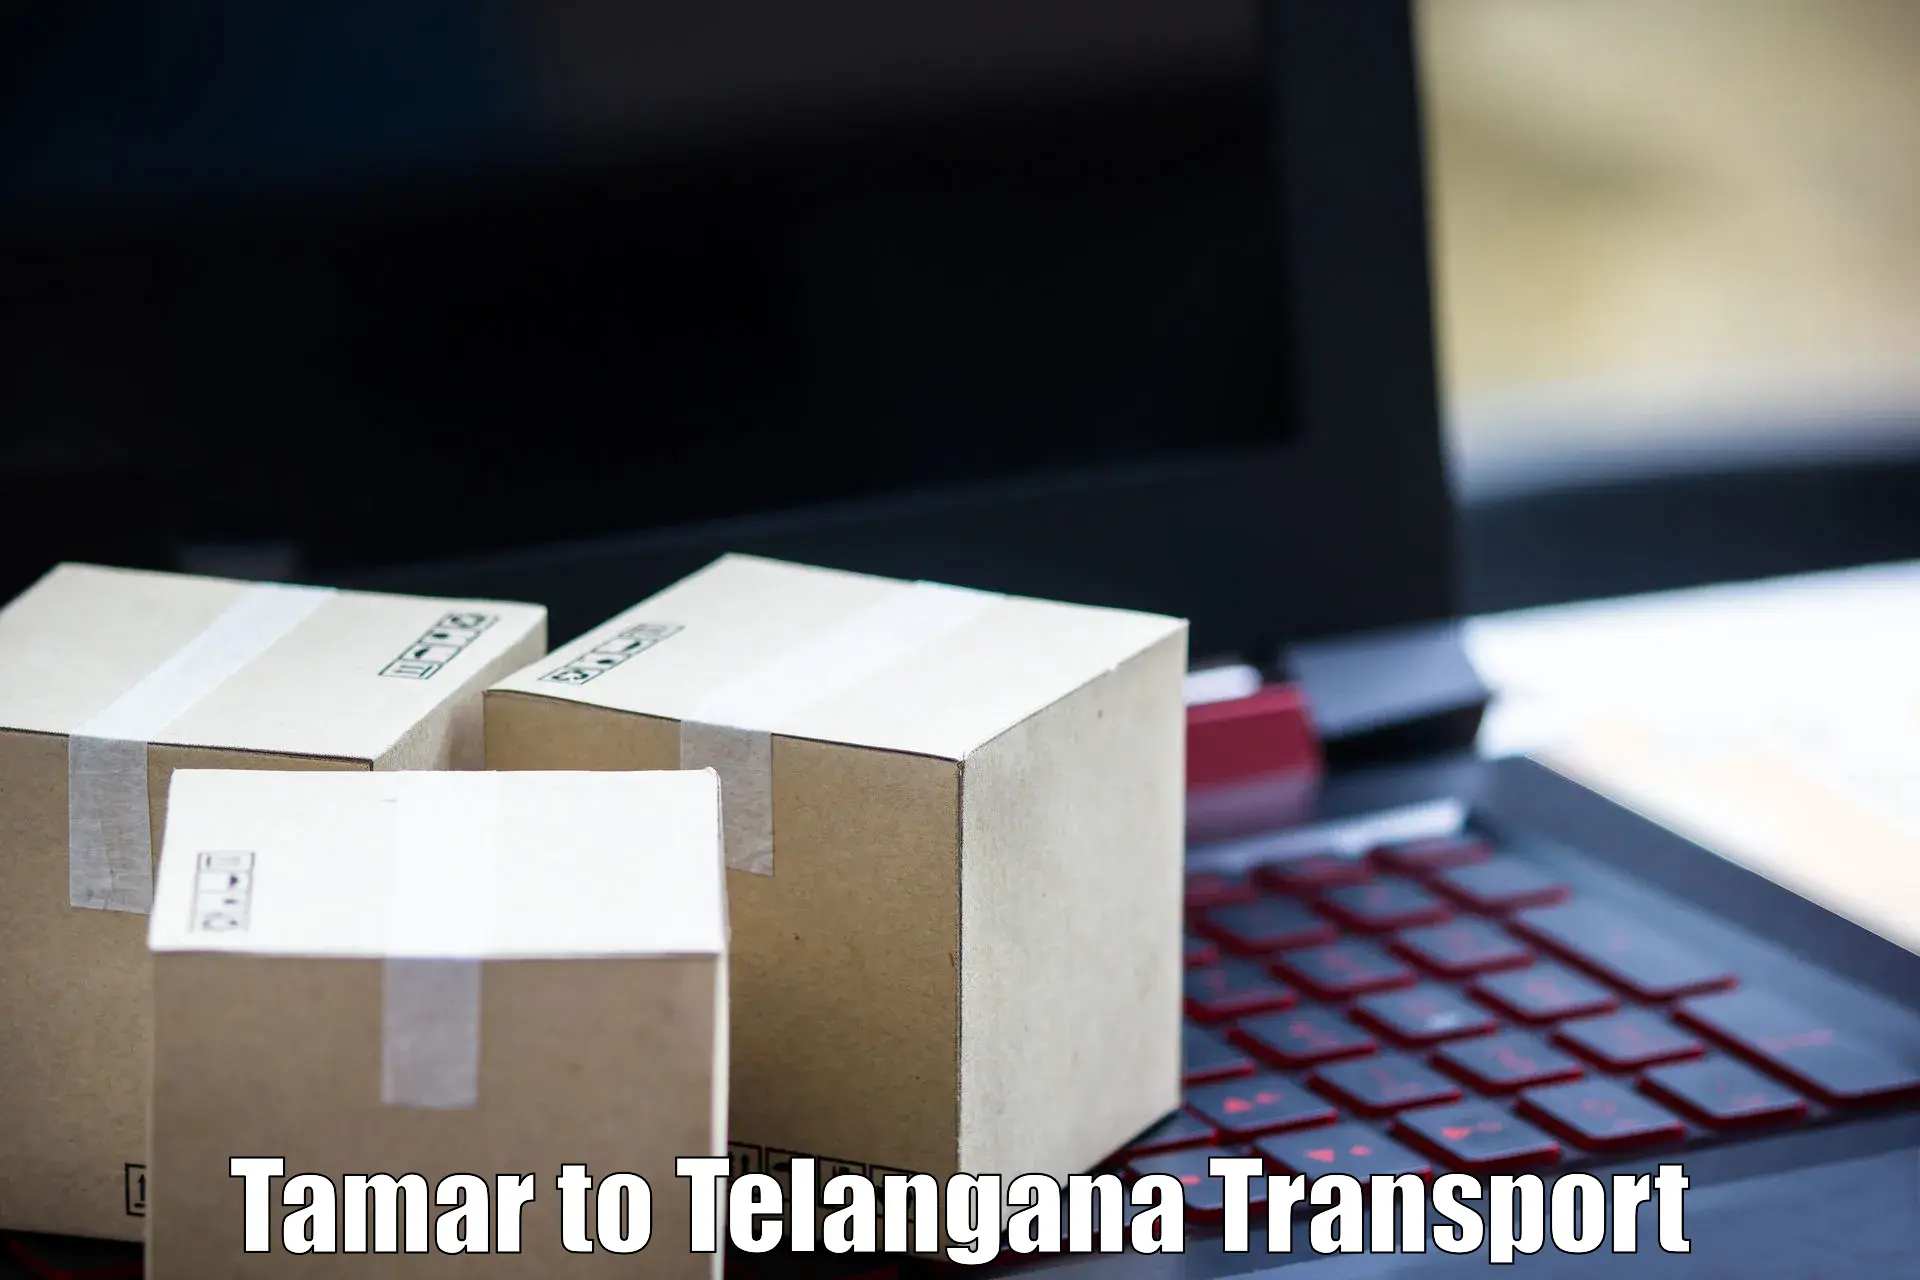 Transport shared services in Tamar to Vemulawada